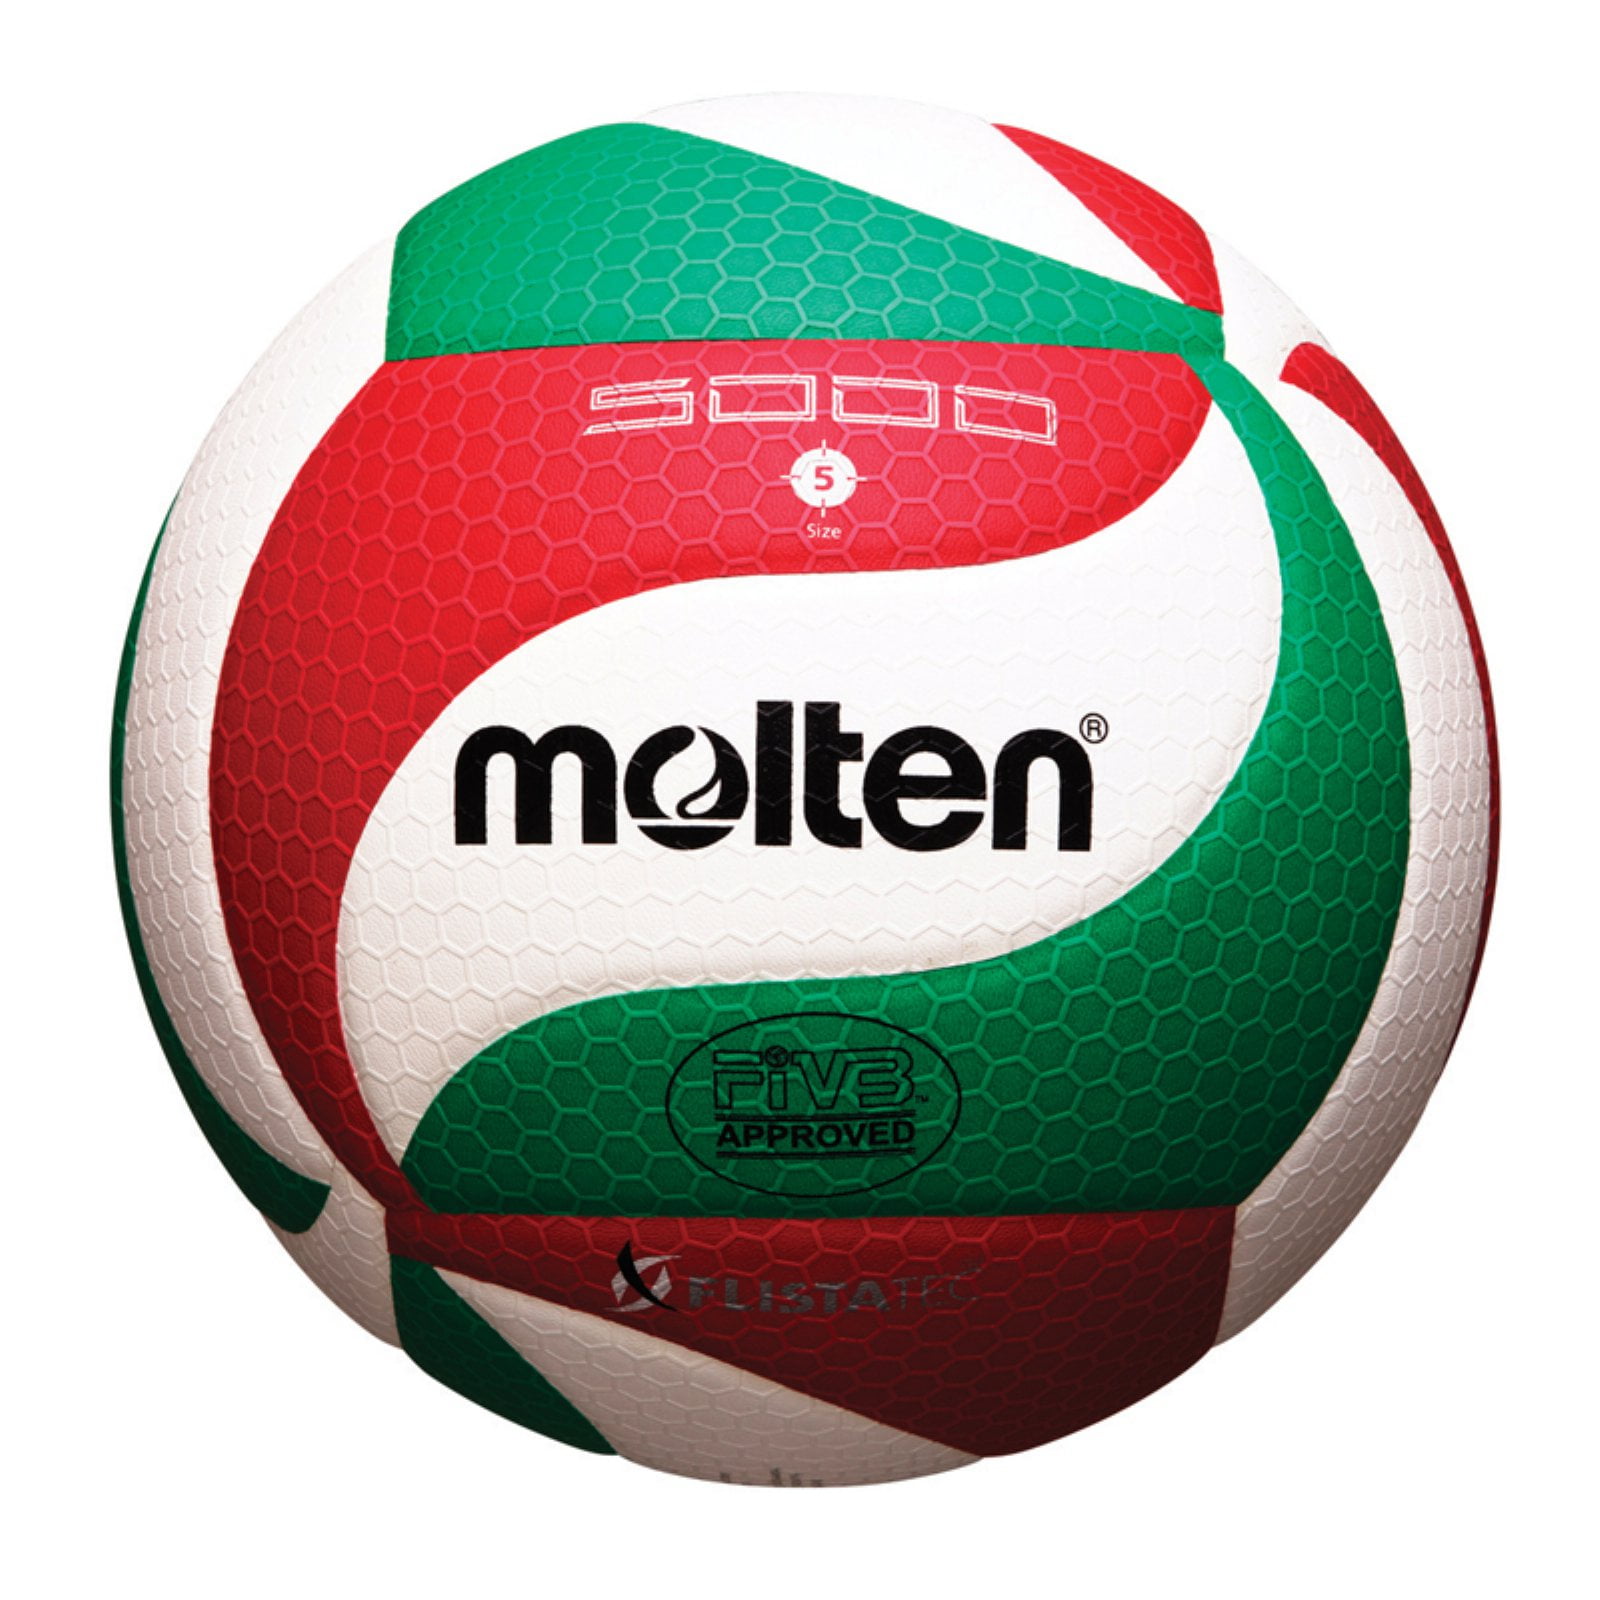 Molten Size 5 Volleyball Syntheti Leather Soft Touch Indoor Outdoor Game V5M5000 